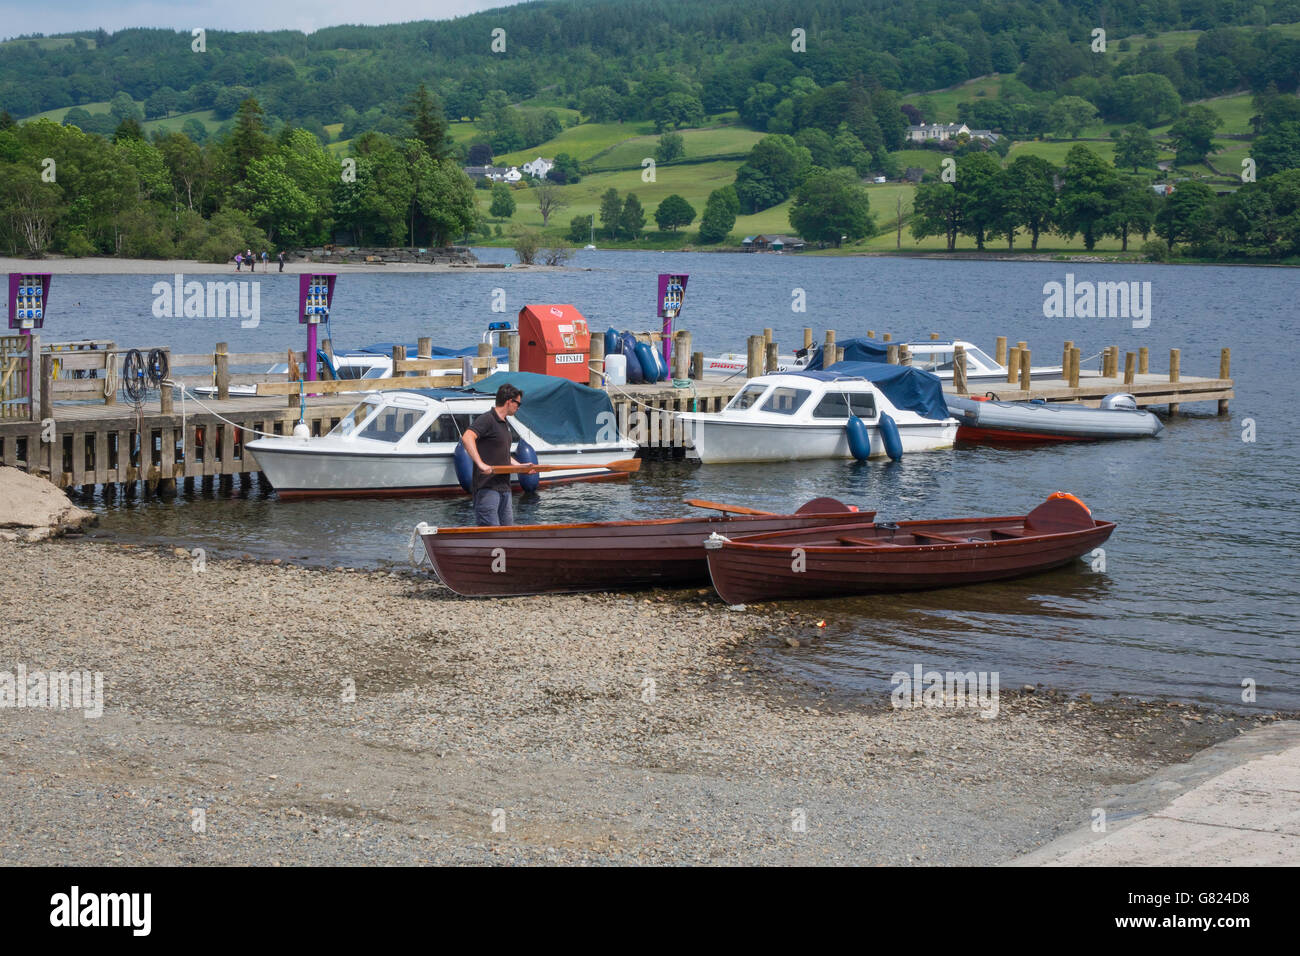 Electrically powered motor boats with charging points and traditional wooden skiffs for hire at Coniston Water Cumbria UK Stock Photo